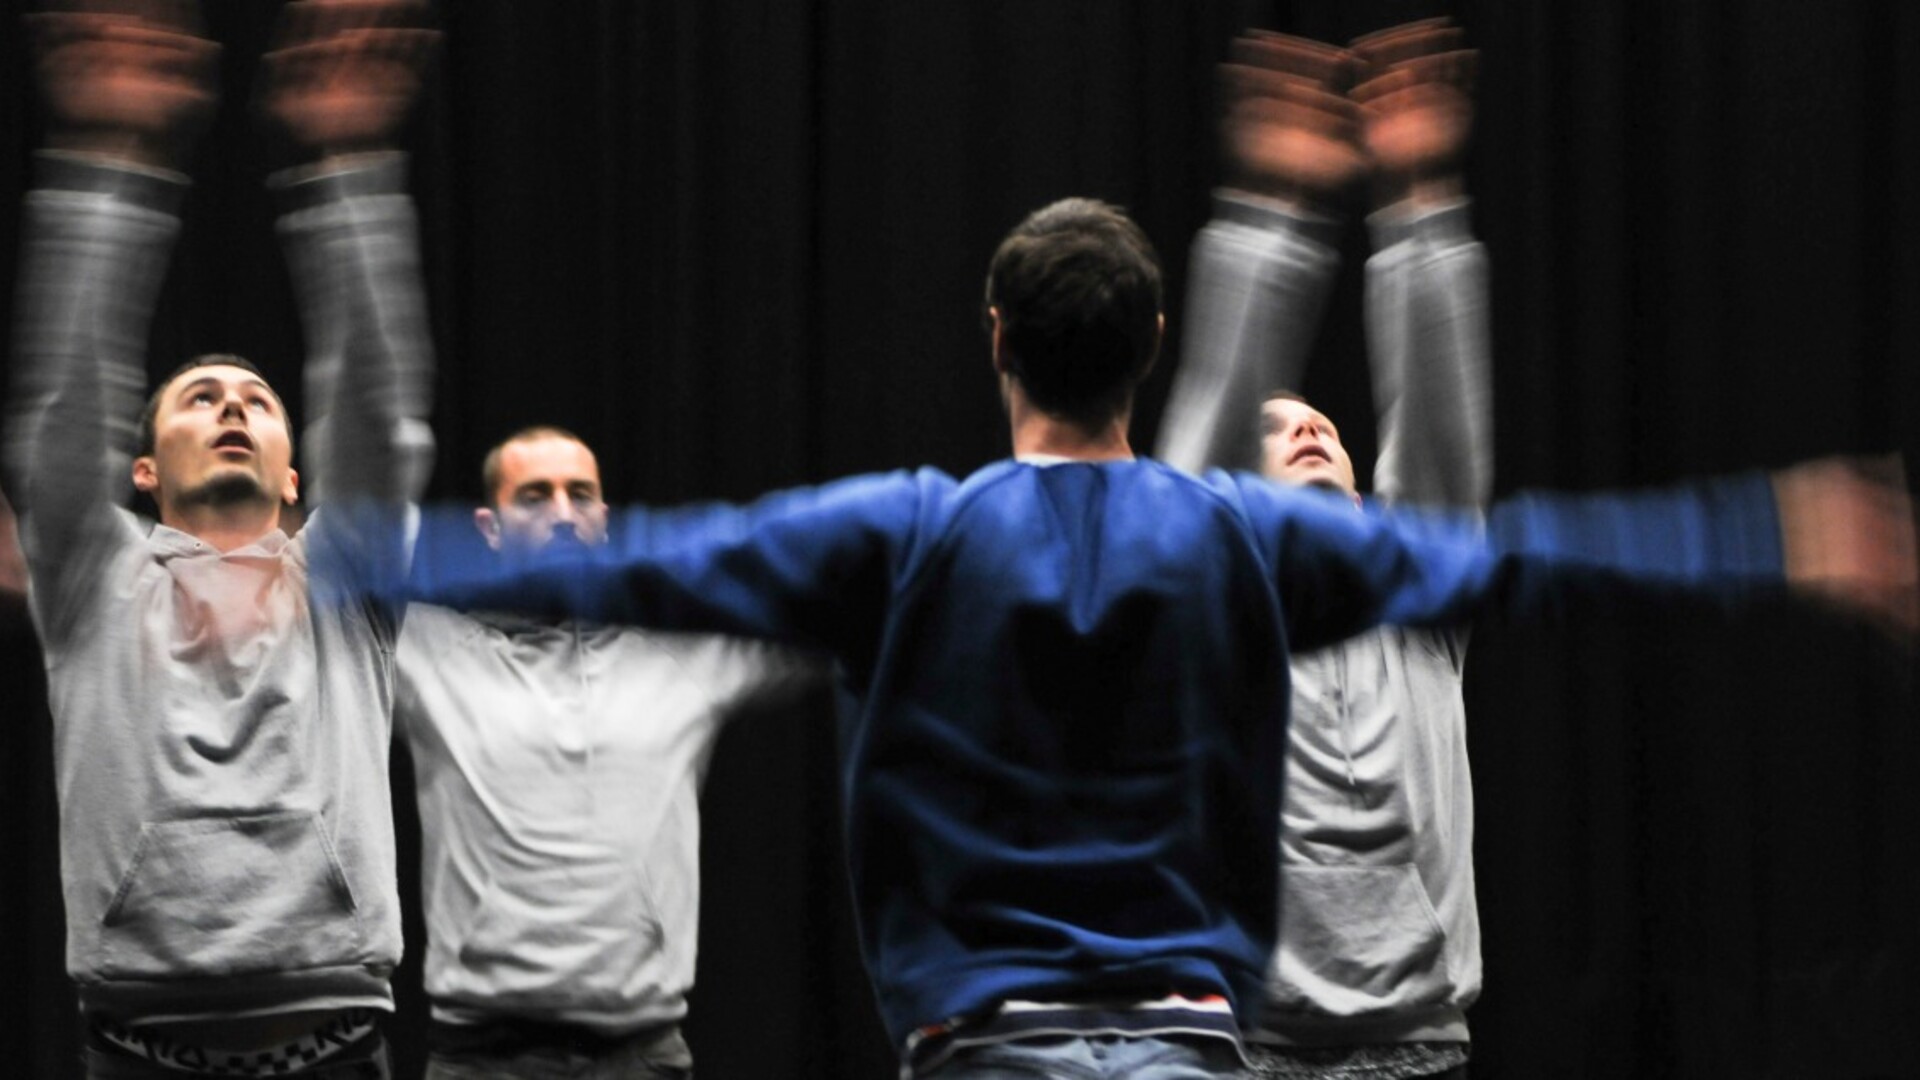 4 dancers, 3 in grey tops facing 1 in a blue top, wave their arms energetically while looking up or forward in front of a black wall